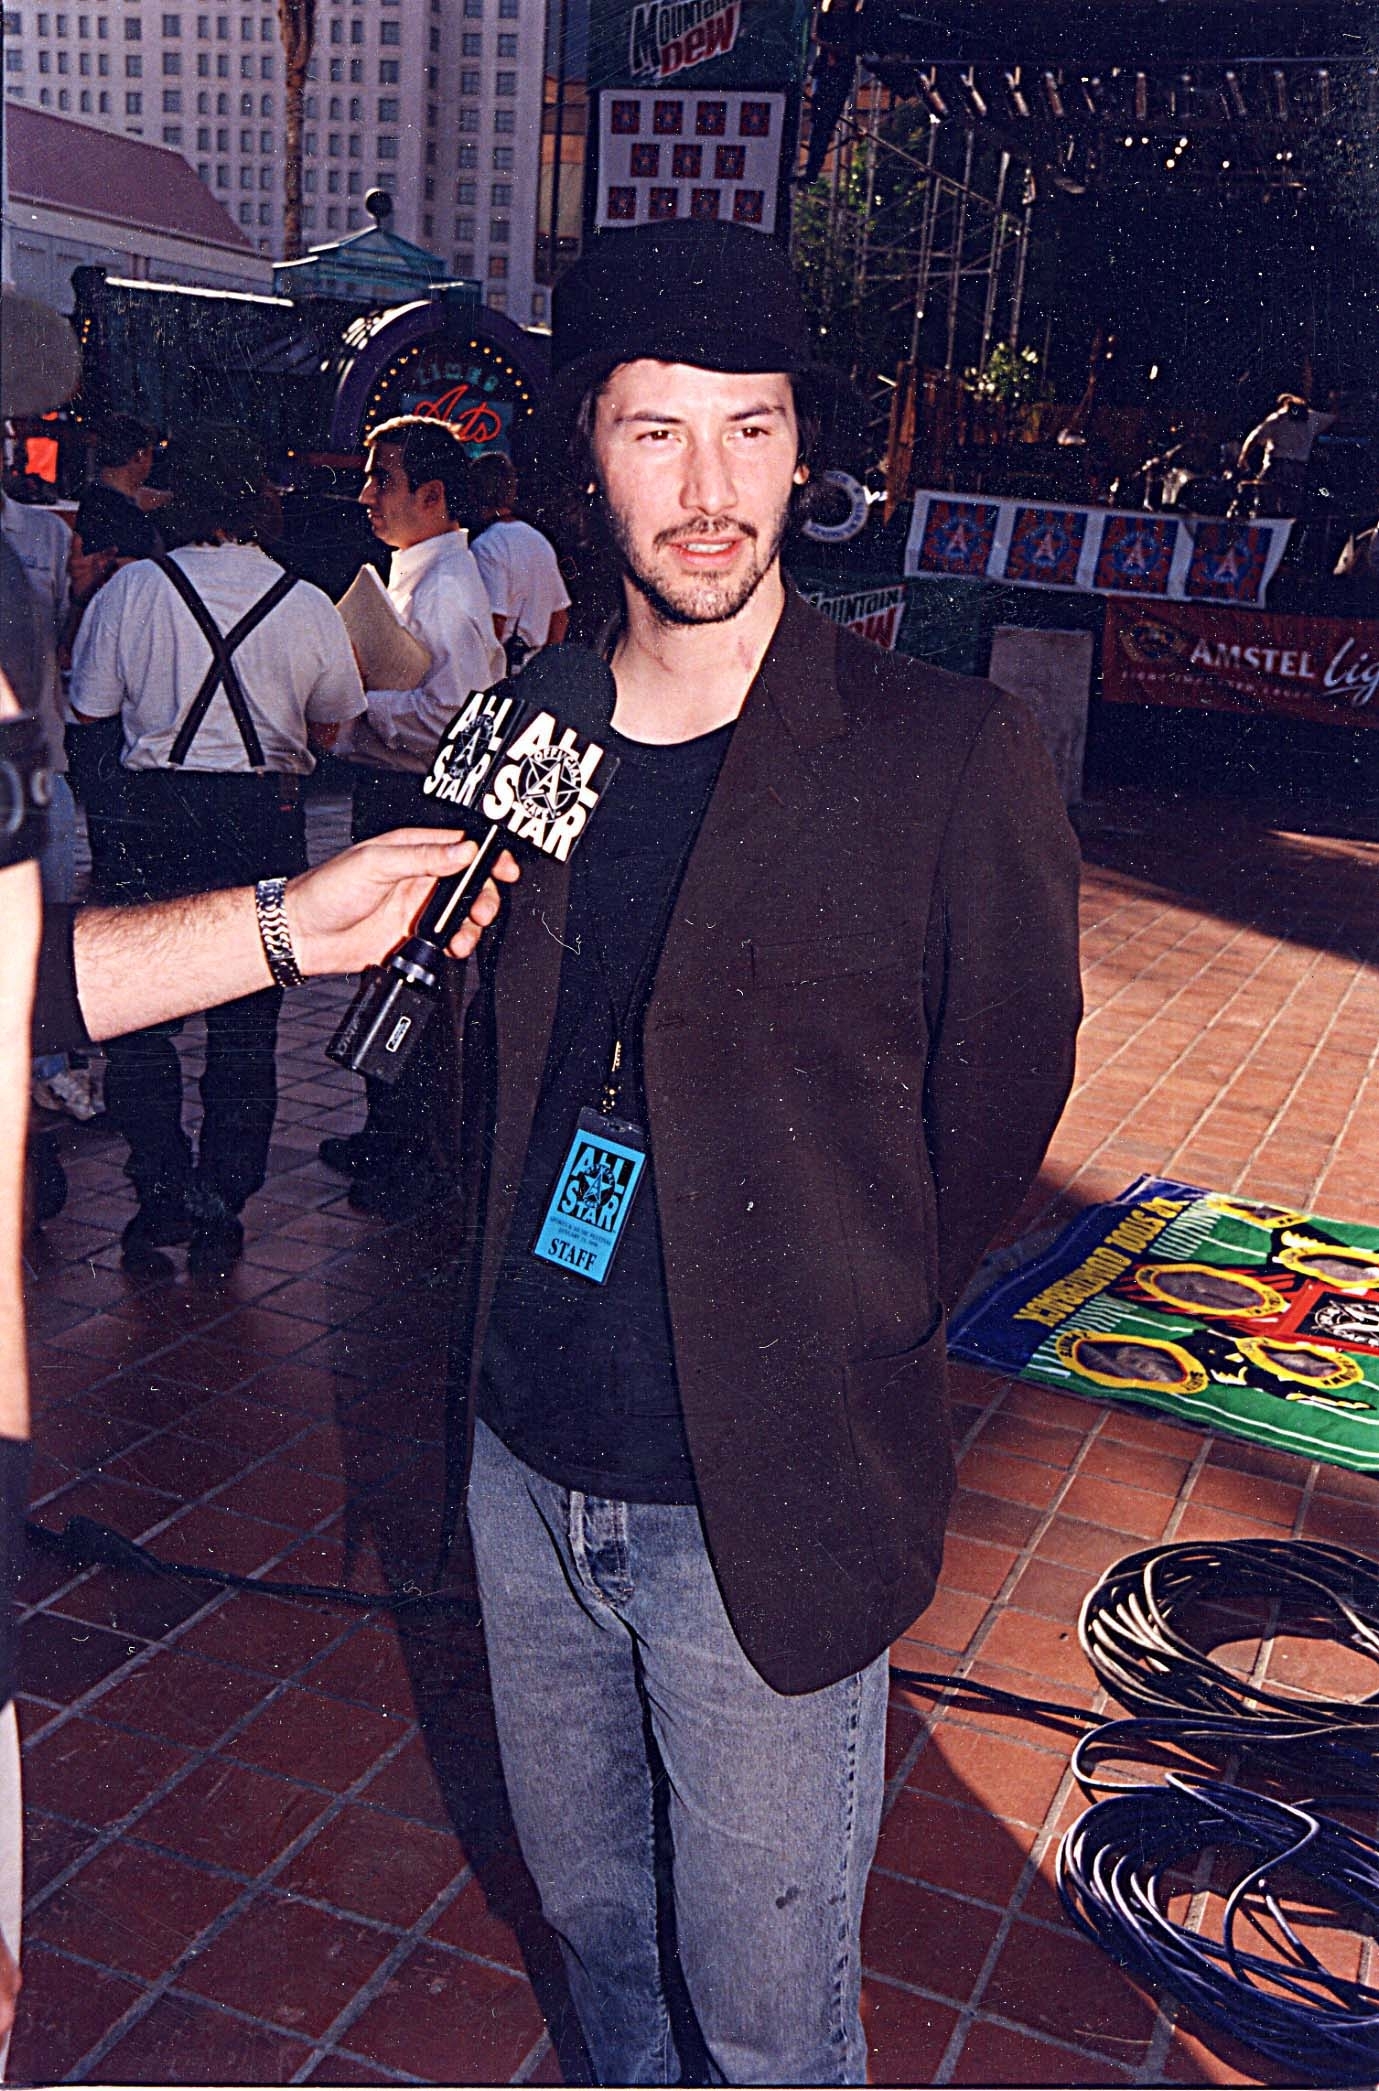 Keanu in jeans, a top, jacket, and hat, being interviewed